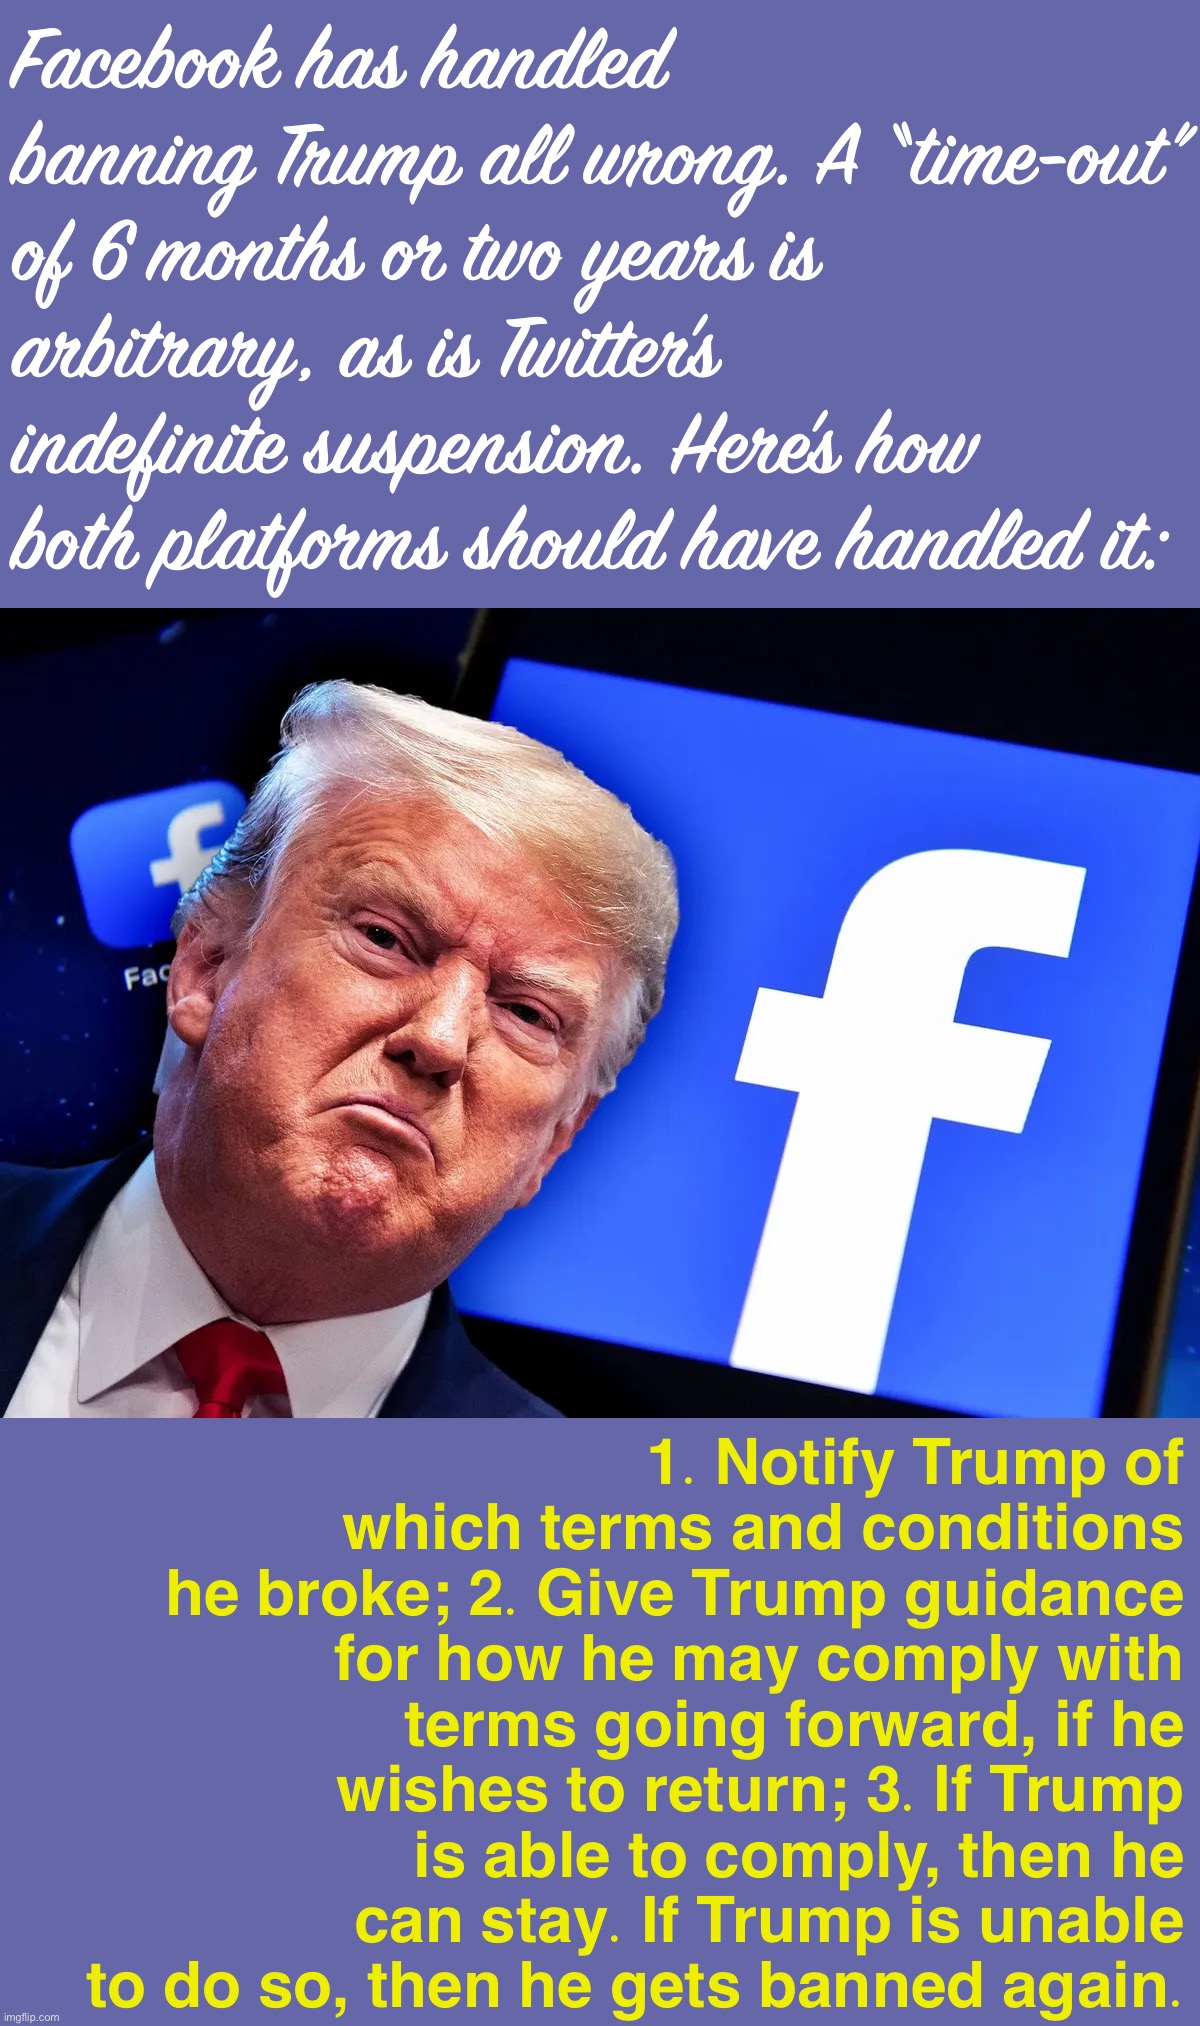 Doing this would put the ball back in Trump’s court, give him incentives to cooperate, and be transparent to Trump & the public. | Facebook has handled banning Trump all wrong. A “time-out” of 6 months or two years is arbitrary, as is Twitter’s indefinite suspension. Here’s how both platforms should have handled it:; 1. Notify Trump of which terms and conditions he broke; 2. Give Trump guidance for how he may comply with terms going forward, if he wishes to return; 3. If Trump is able to comply, then he can stay. If Trump is unable to do so, then he gets banned again. | image tagged in trump facebook ban,facebook,banned,social media,moderators,twitter | made w/ Imgflip meme maker